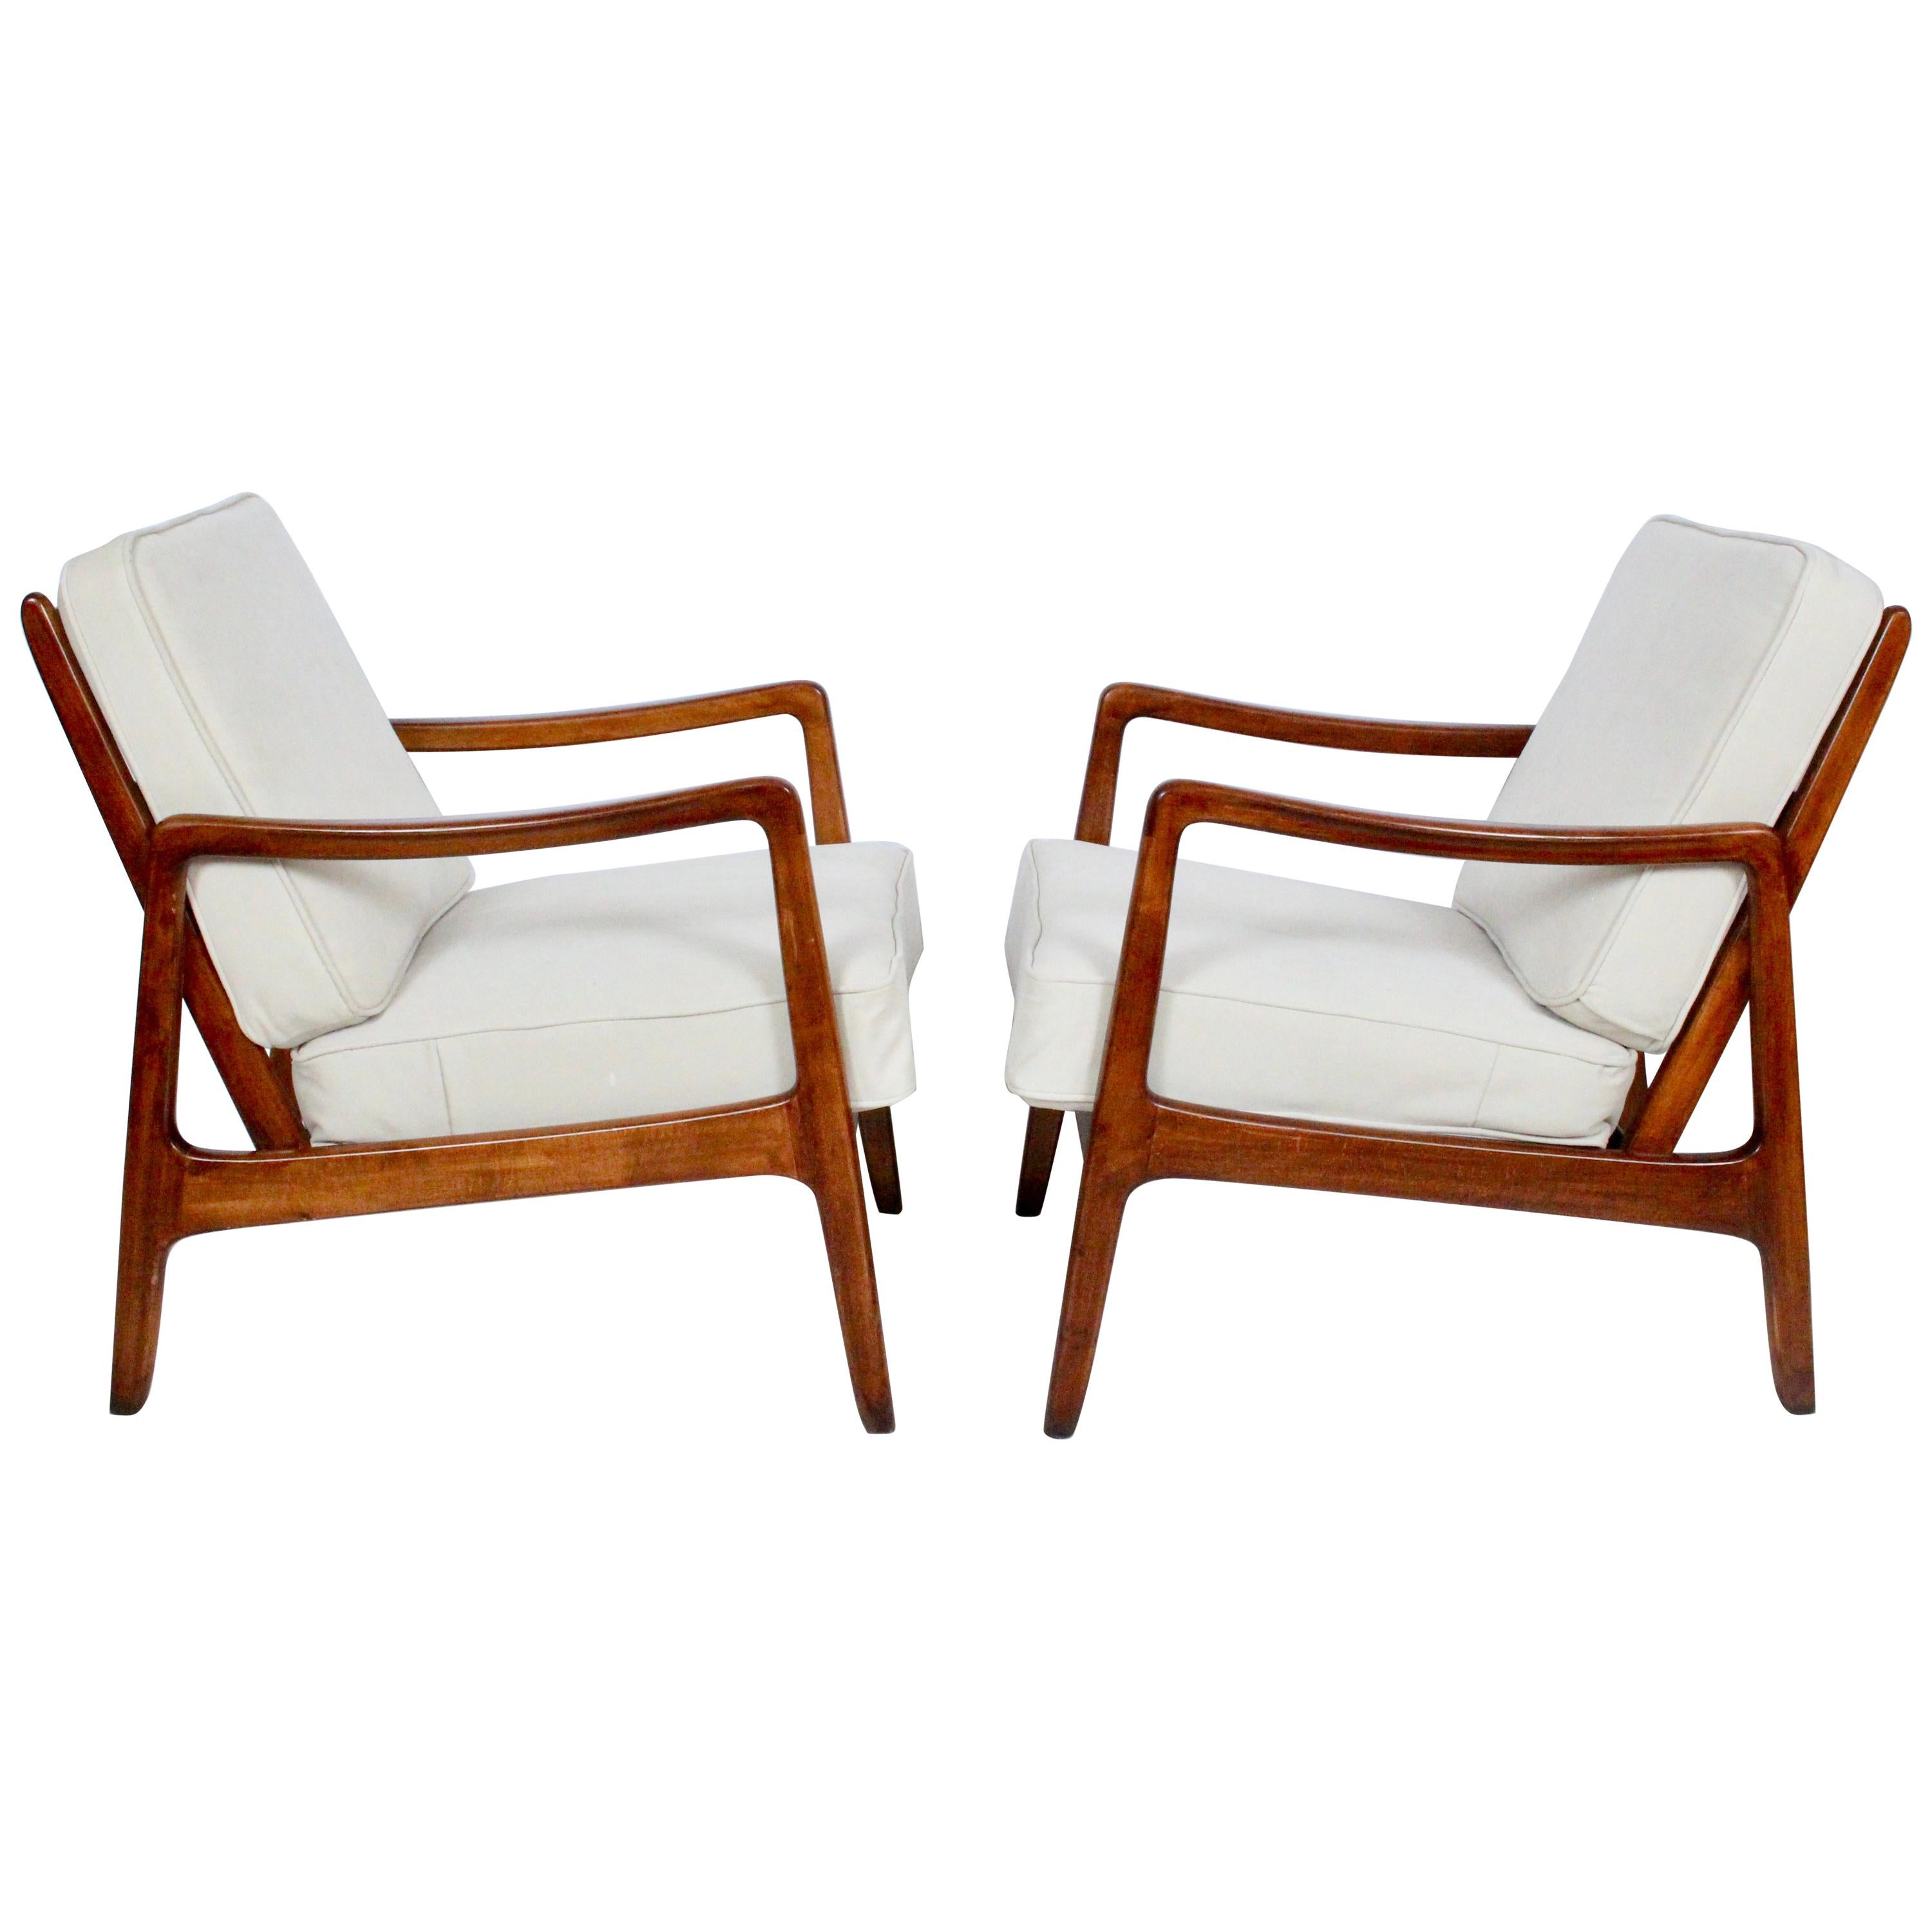 Early Pair of Ole Wanscher Mahogany Lounge Chairs, 1950's